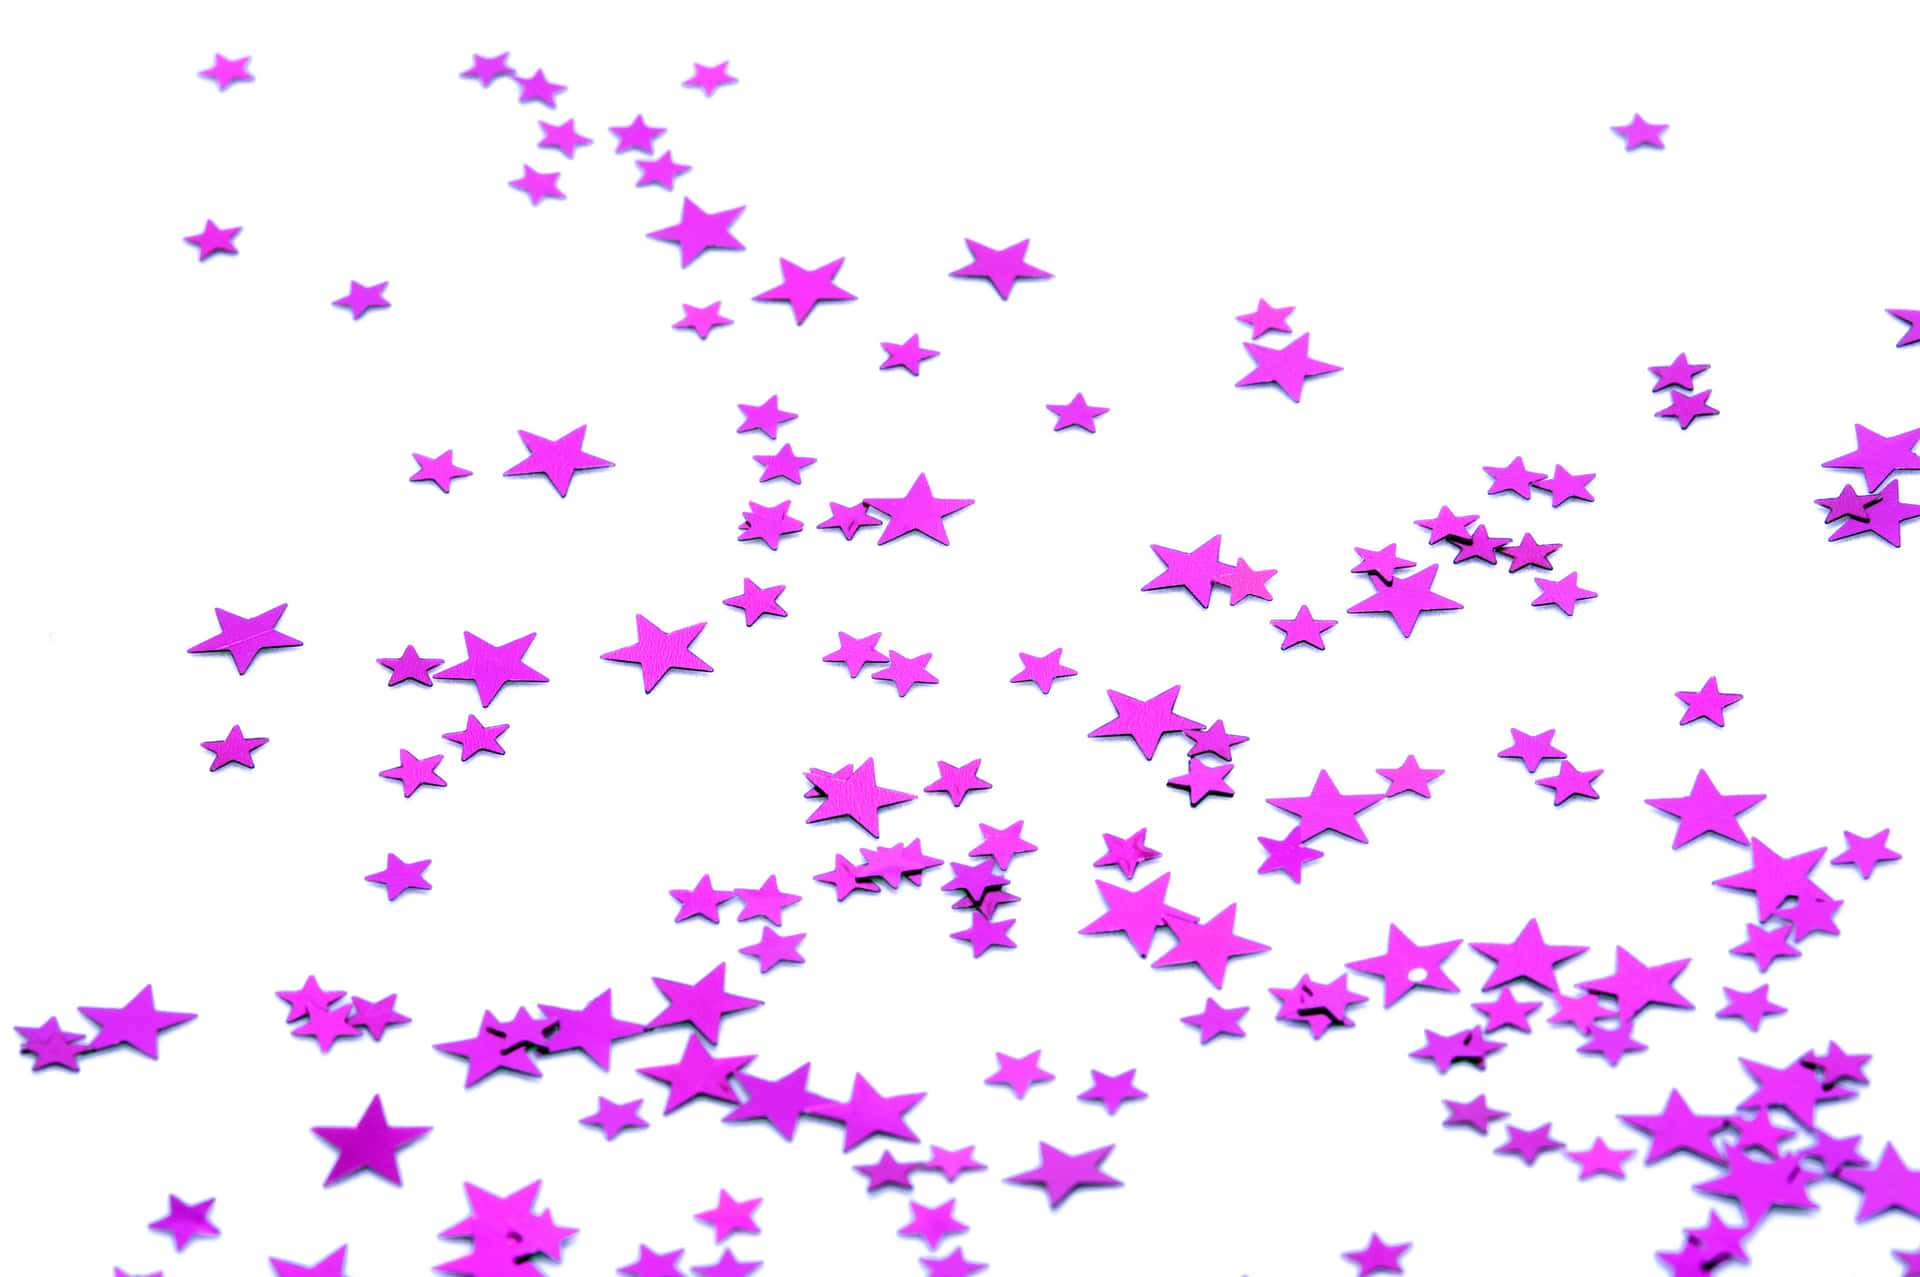 Download Enchanting Pink Stars in the Night Sky Wallpaper | Wallpapers.com